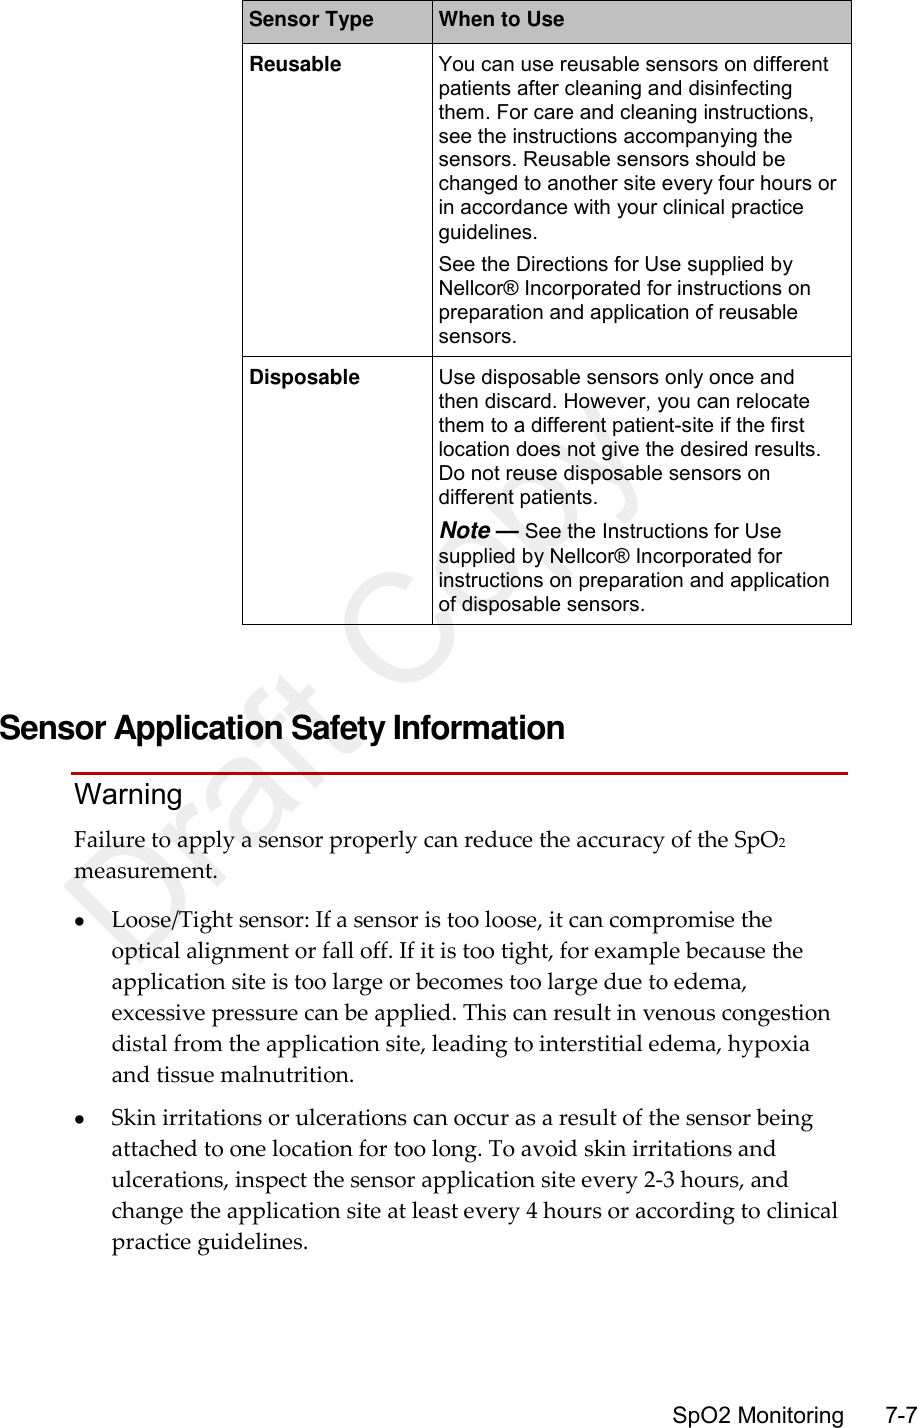      SpO2 Monitoring       7-7 Sensor Type When to Use Reusable You can use reusable sensors on different patients after cleaning and disinfecting them. For care and cleaning instructions, see the instructions accompanying the sensors. Reusable sensors should be changed to another site every four hours or in accordance with your clinical practice guidelines. See the Directions for Use supplied by Nellcor® Incorporated for instructions on preparation and application of reusable sensors. Disposable Use disposable sensors only once and then discard. However, you can relocate them to a different patient-site if the first location does not give the desired results. Do not reuse disposable sensors on different patients. Note — See the Instructions for Use supplied by Nellcor® Incorporated for instructions on preparation and application of disposable sensors.   Sensor Application Safety Information Warning Failure to apply a sensor properly can reduce the accuracy of the SpO2 measurement.  Loose/Tight sensor: If a sensor is too loose, it can compromise the optical alignment or fall off. If it is too tight, for example because the application site is too large or becomes too large due to edema, excessive pressure can be applied. This can result in venous congestion distal from the application site, leading to interstitial edema, hypoxia and tissue malnutrition.  Skin irritations or ulcerations can occur as a result of the sensor being attached to one location for too long. To avoid skin irritations and ulcerations, inspect the sensor application site every 2-3 hours, and change the application site at least every 4 hours or according to clinical practice guidelines. Draft Copy